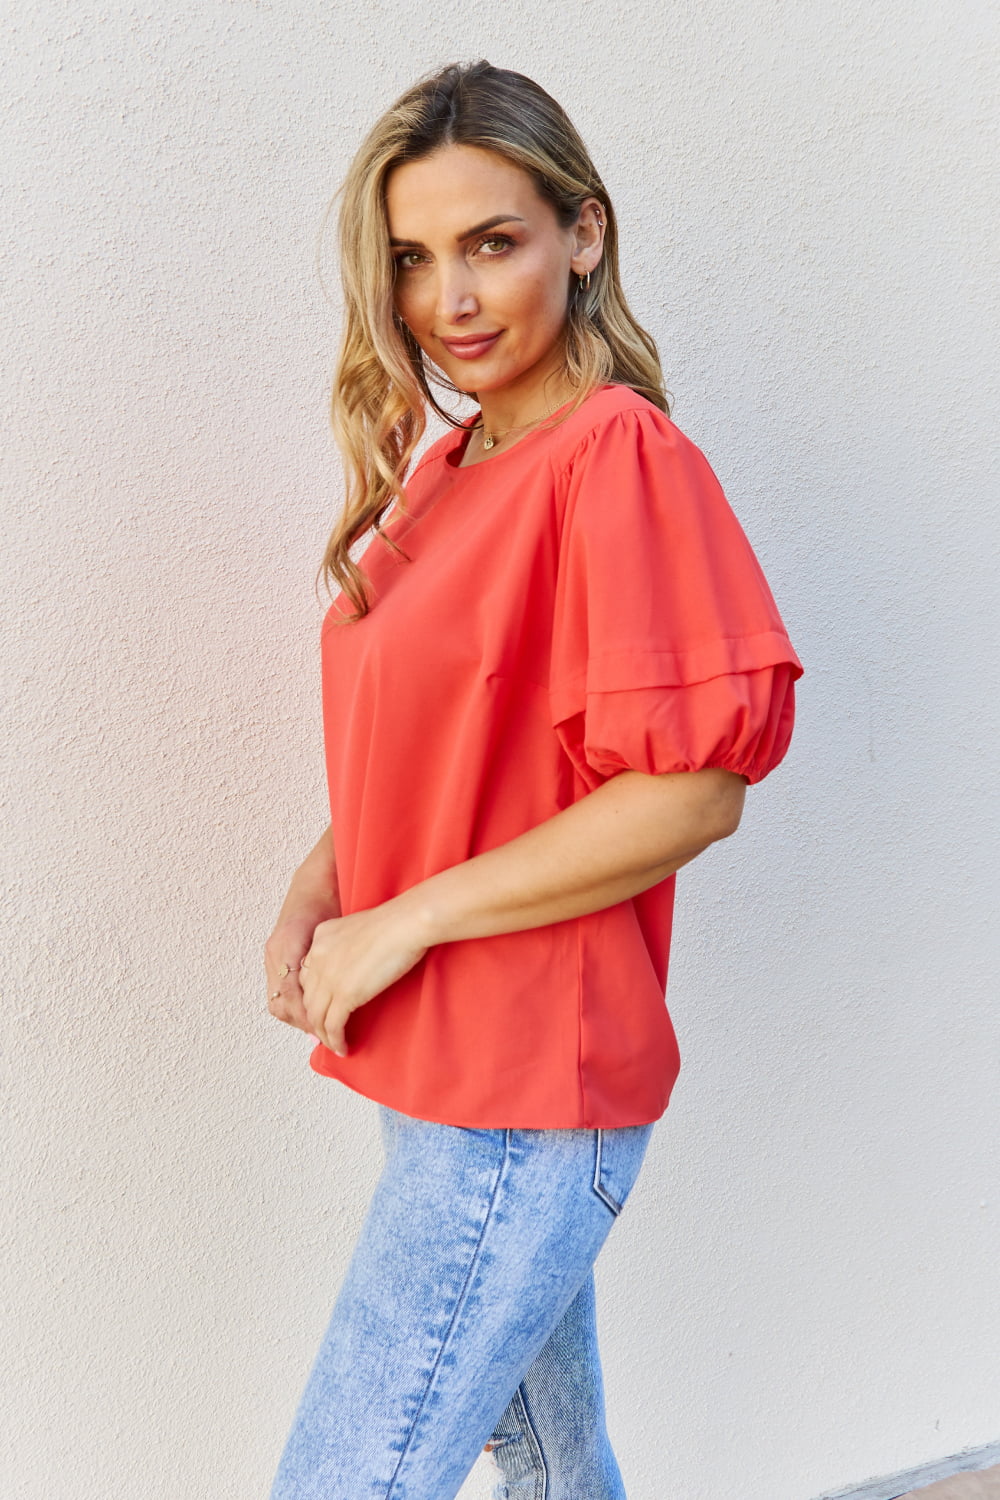 Sweet Innocence Full Size Puff Short Sleeve Top In Tomato